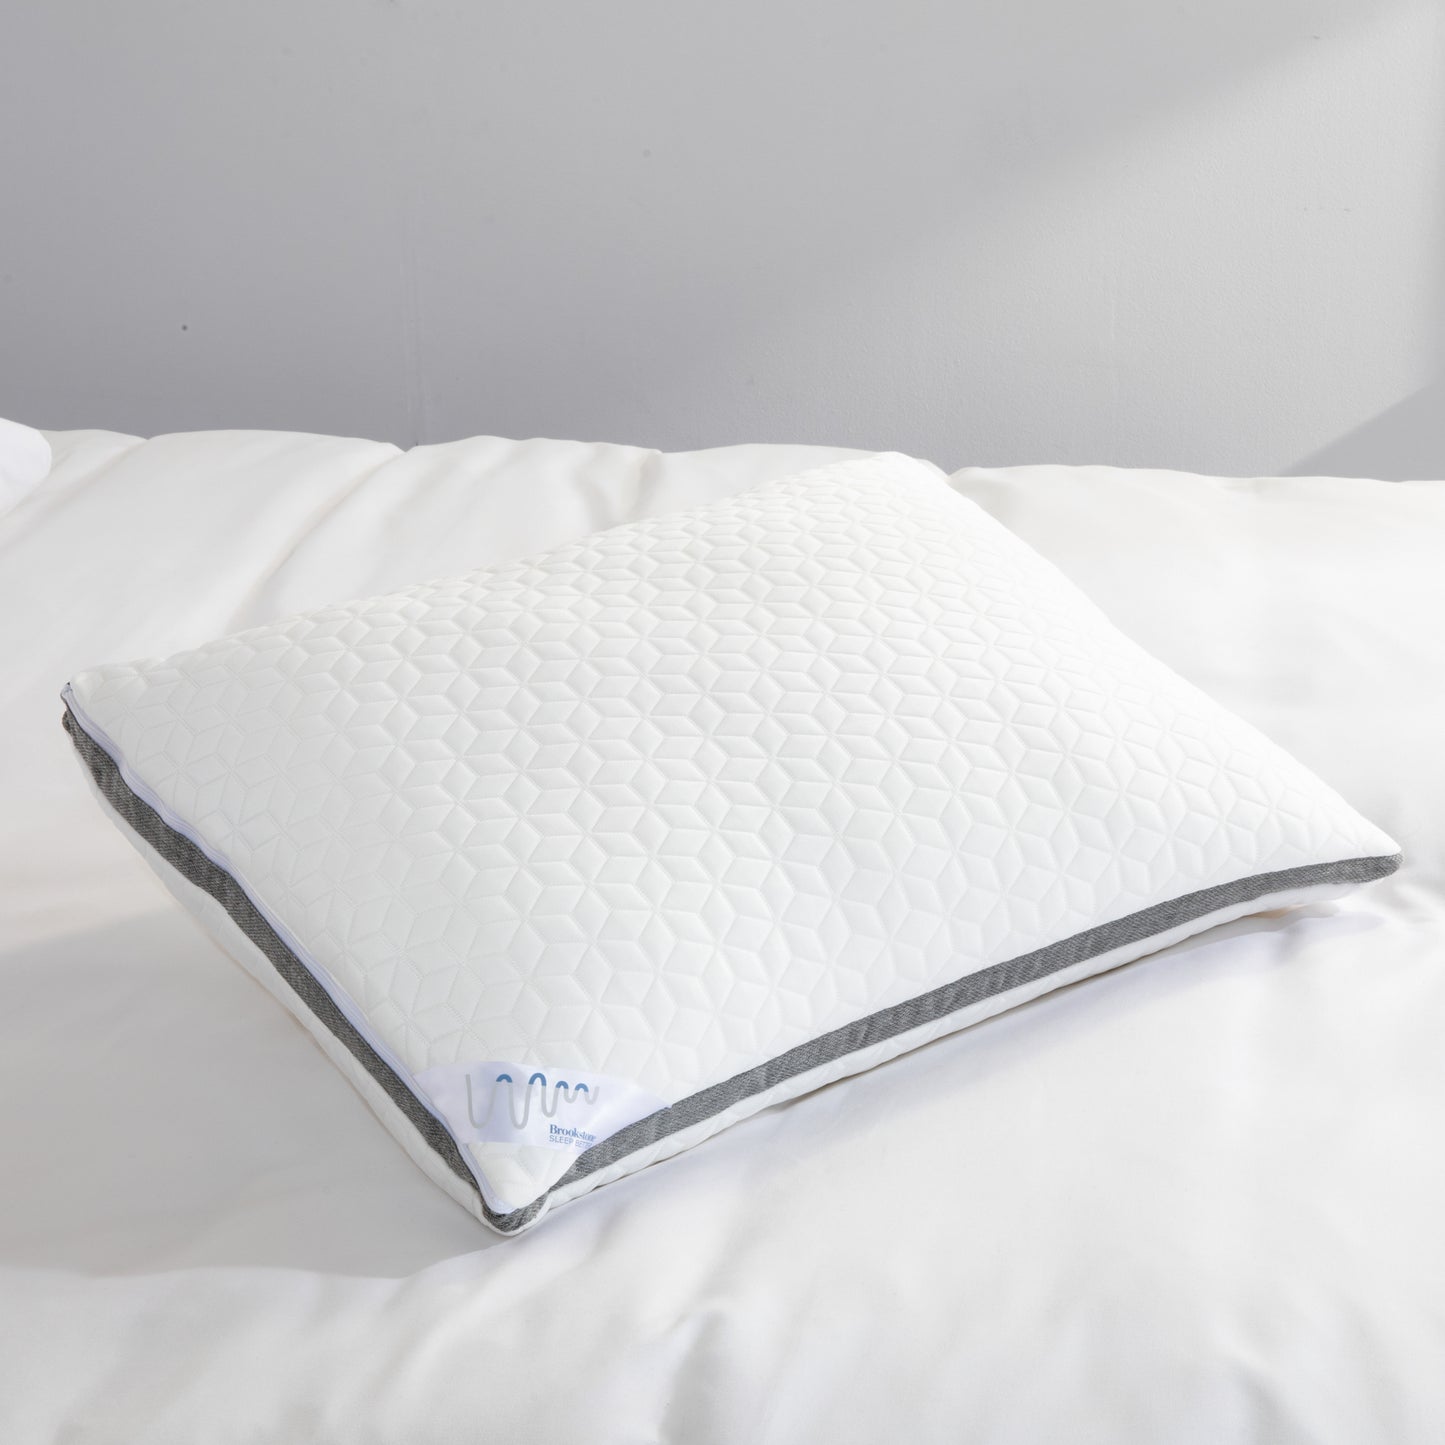 Brookstone Perfect 2-in-1 Comfort Pillow